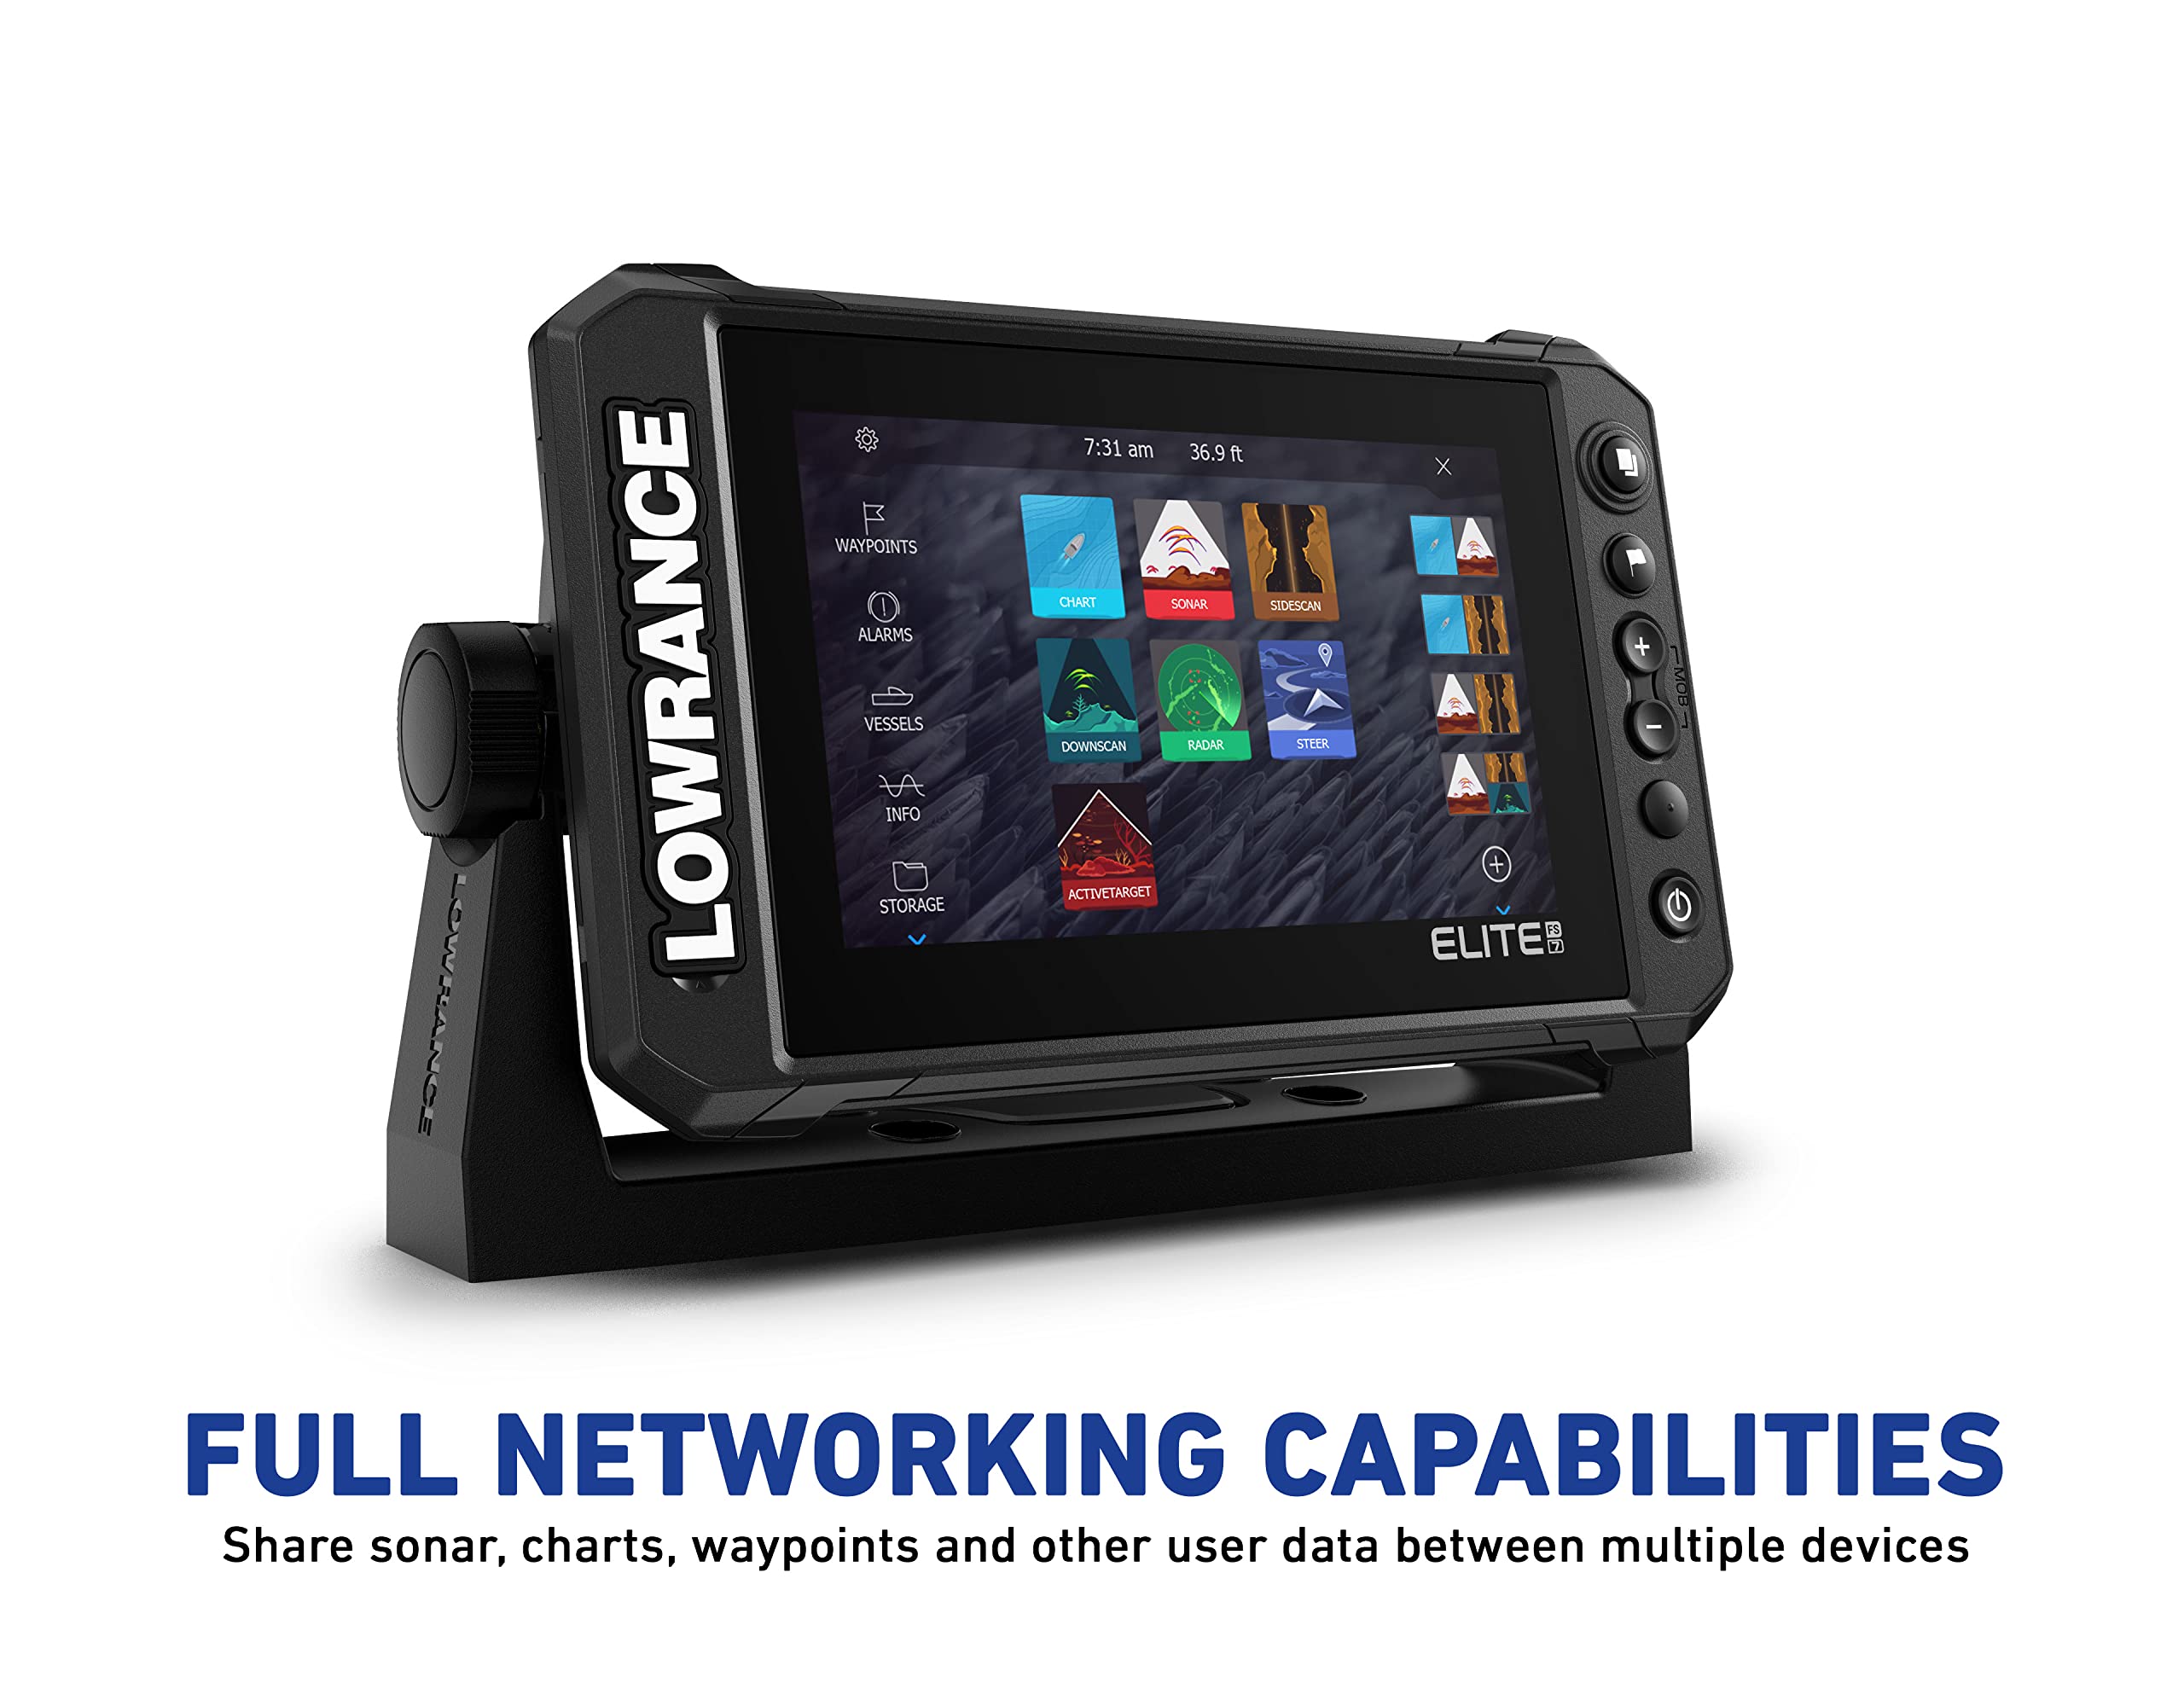 Lowrance Elite FS 9 Fish Finder (No Transducer) with Preloaded C-MAP Contour+ Charts